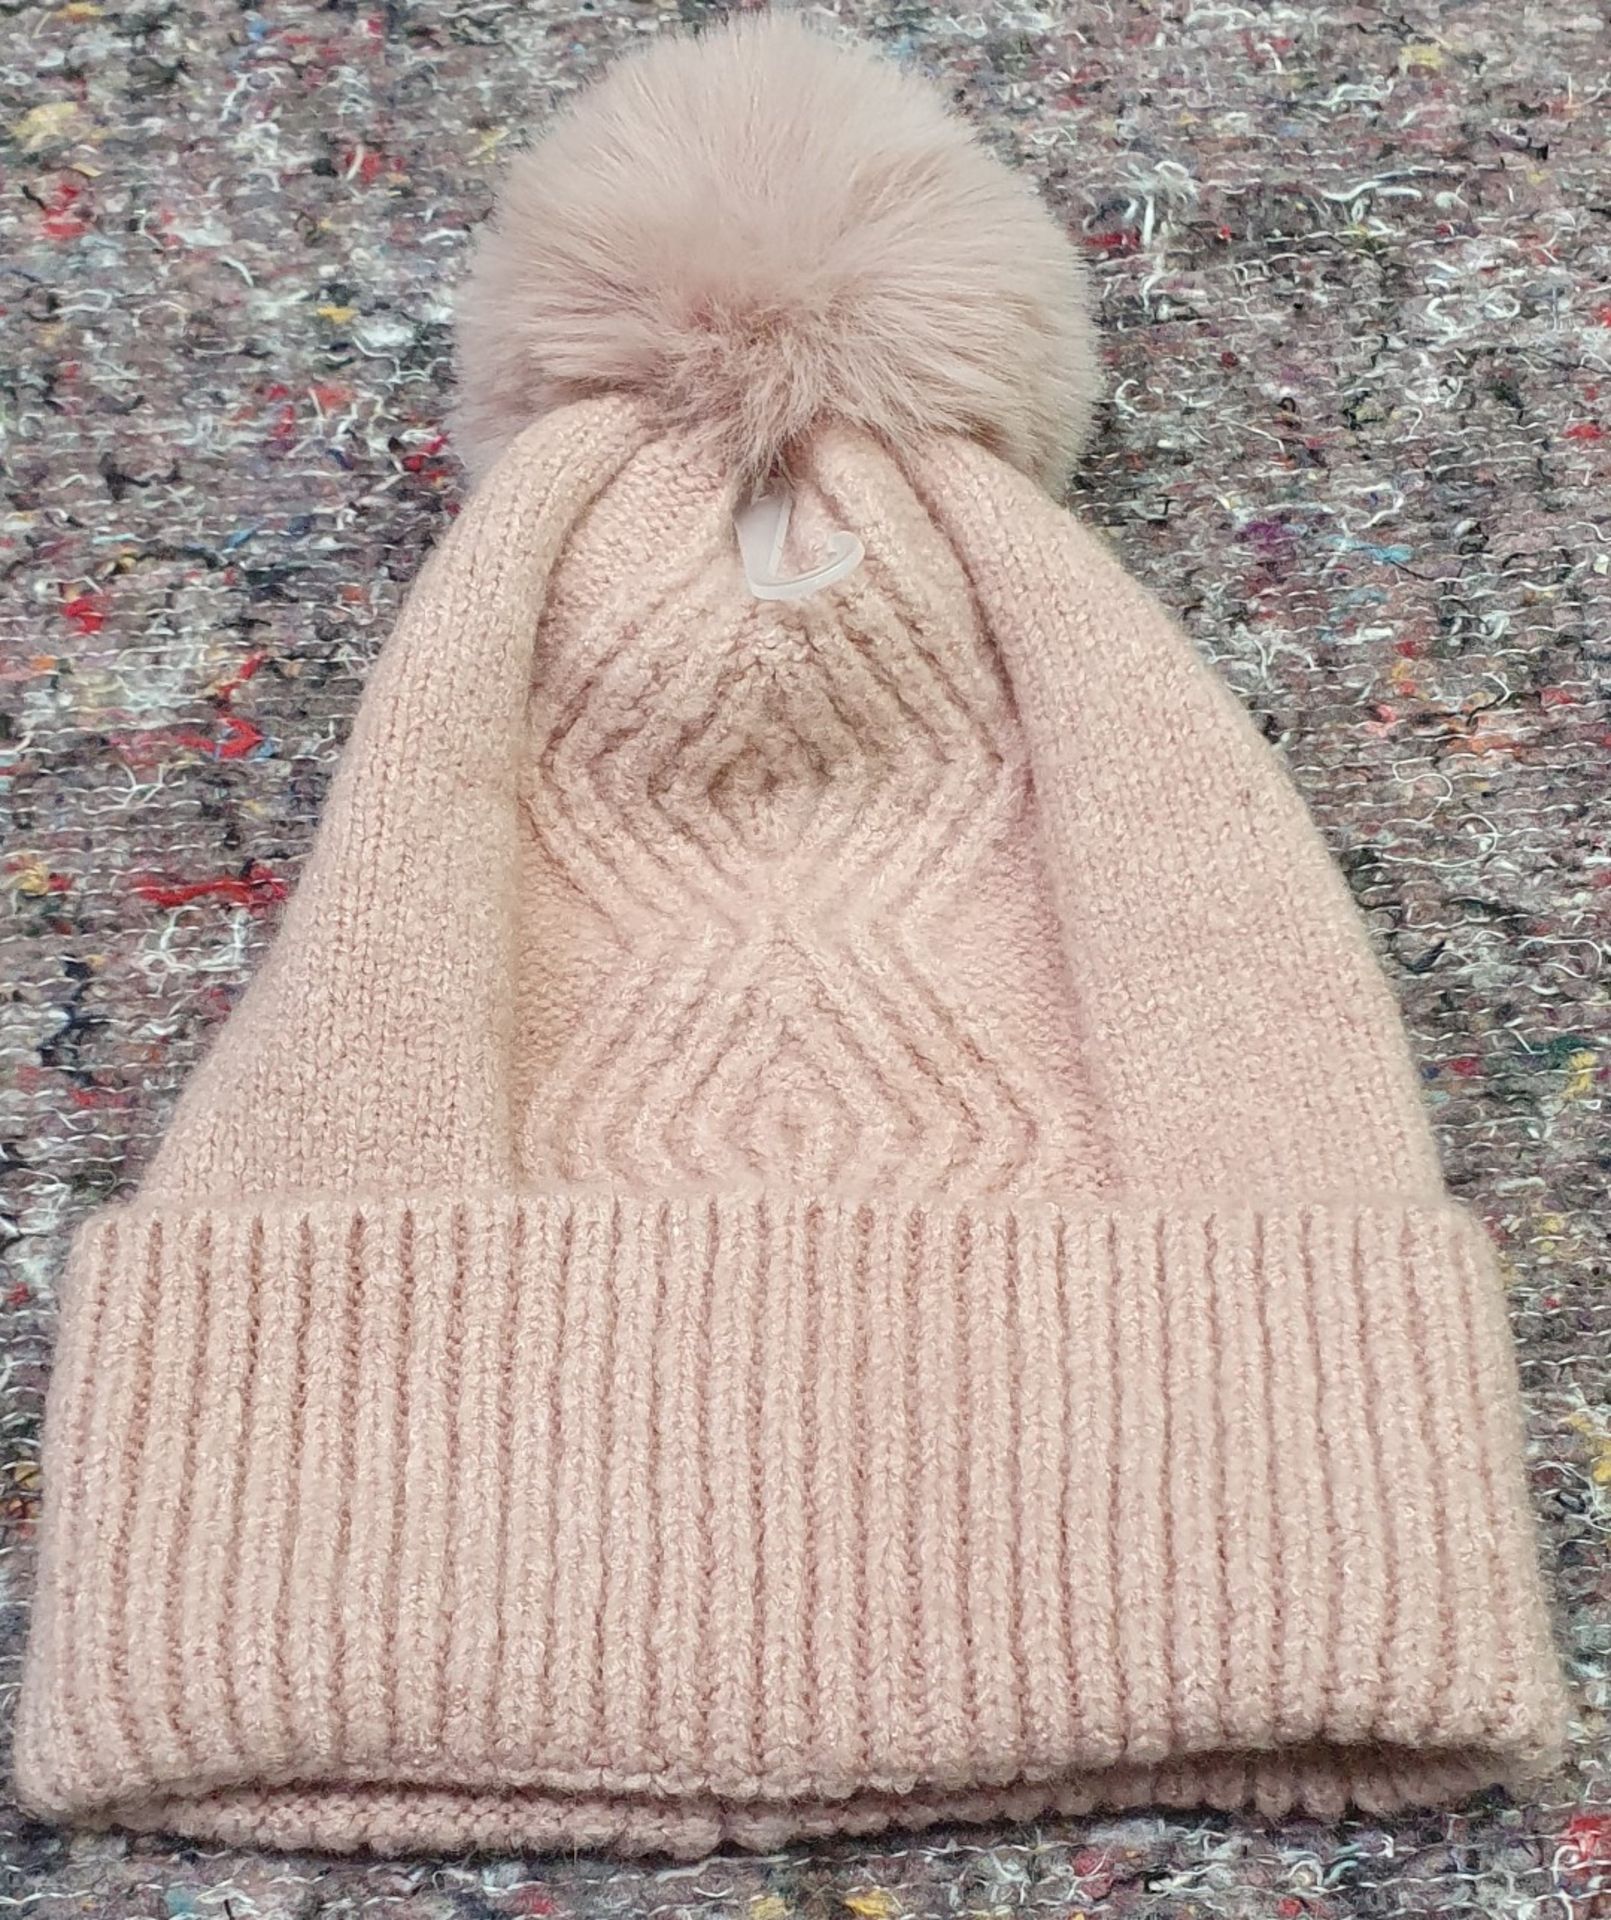 13 x Assorted Bobble Hats and Woolly Gloves by From The Source - New Stock - Ref: TCH236 - CL840 - - Image 4 of 24